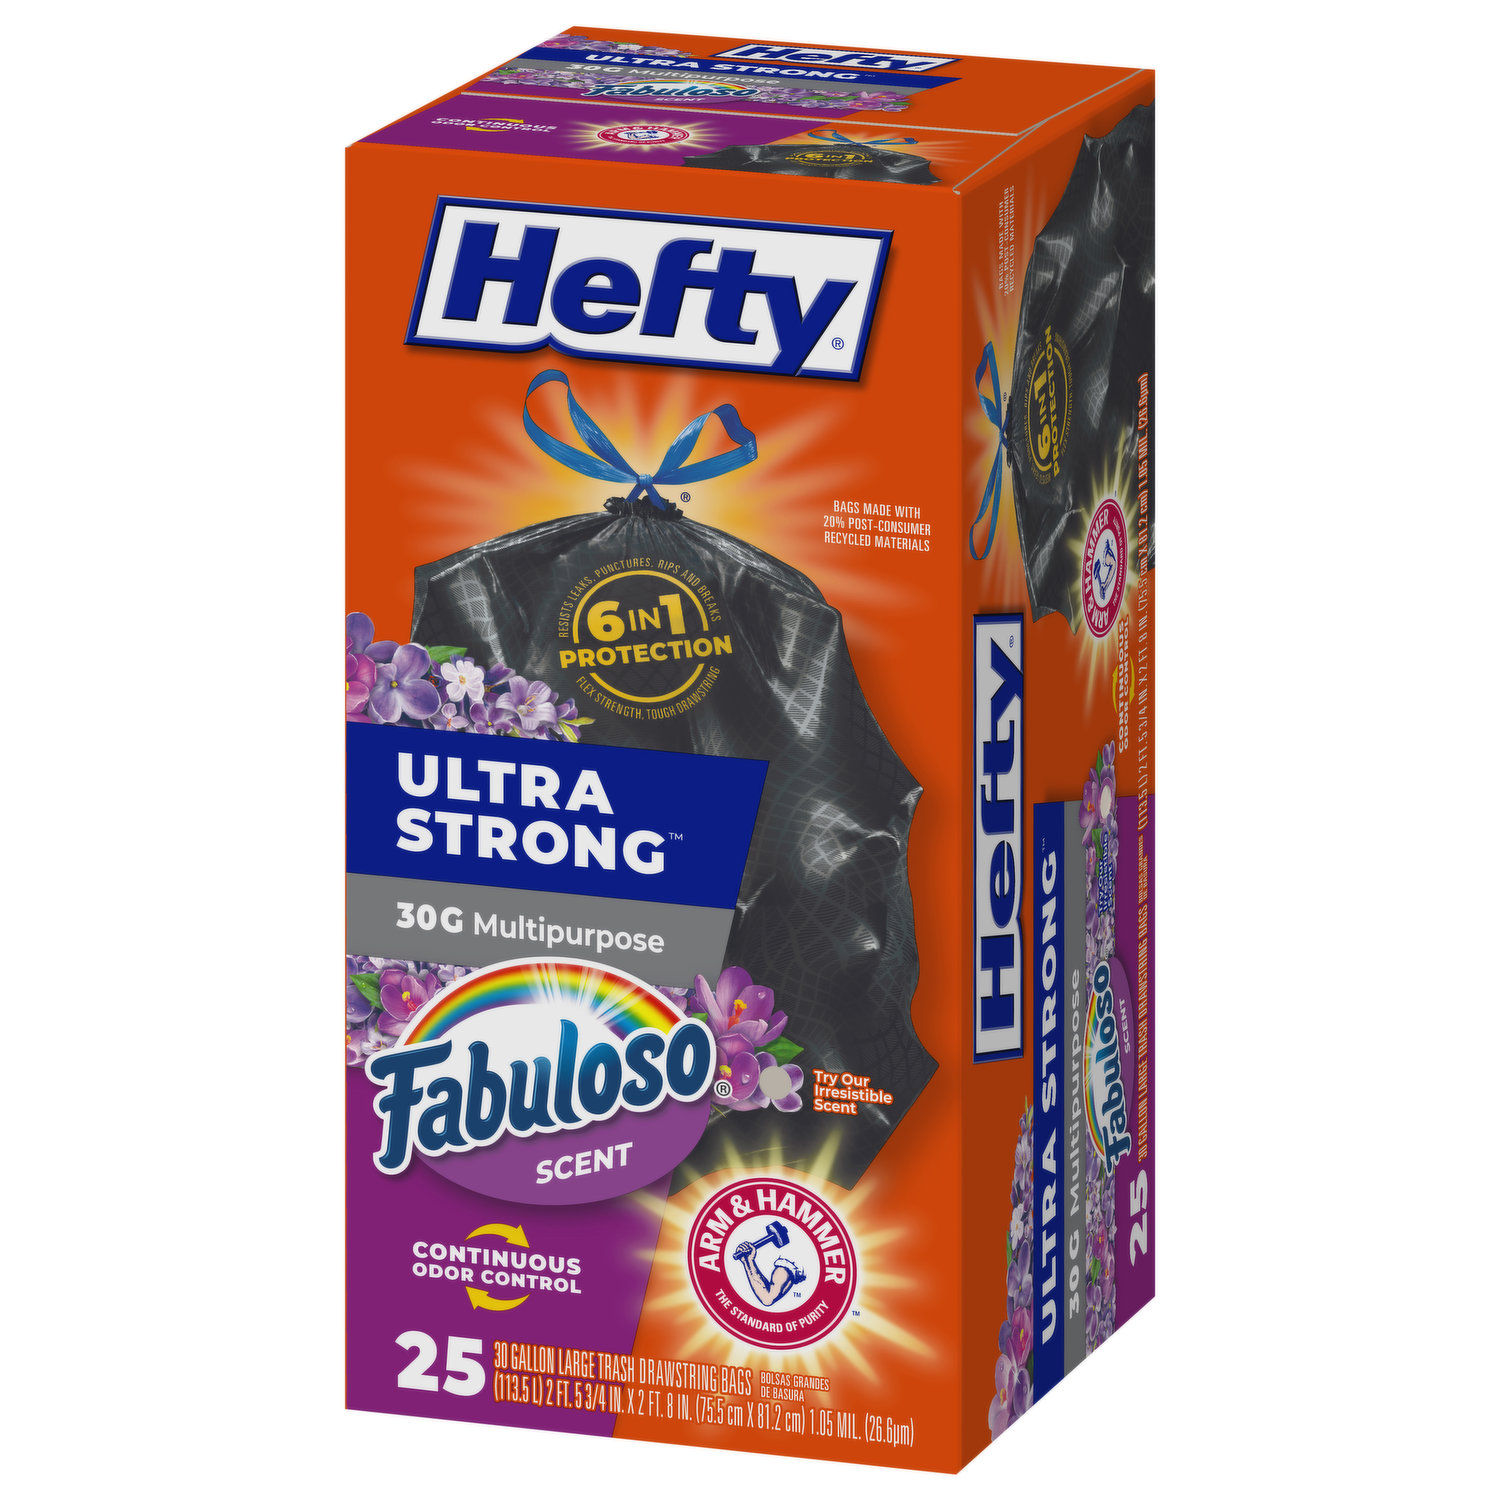 Hefty Ultra Strong Tall Kitchen Trash Bags,Citrus Twist Scent,13 Gallon,80  Count